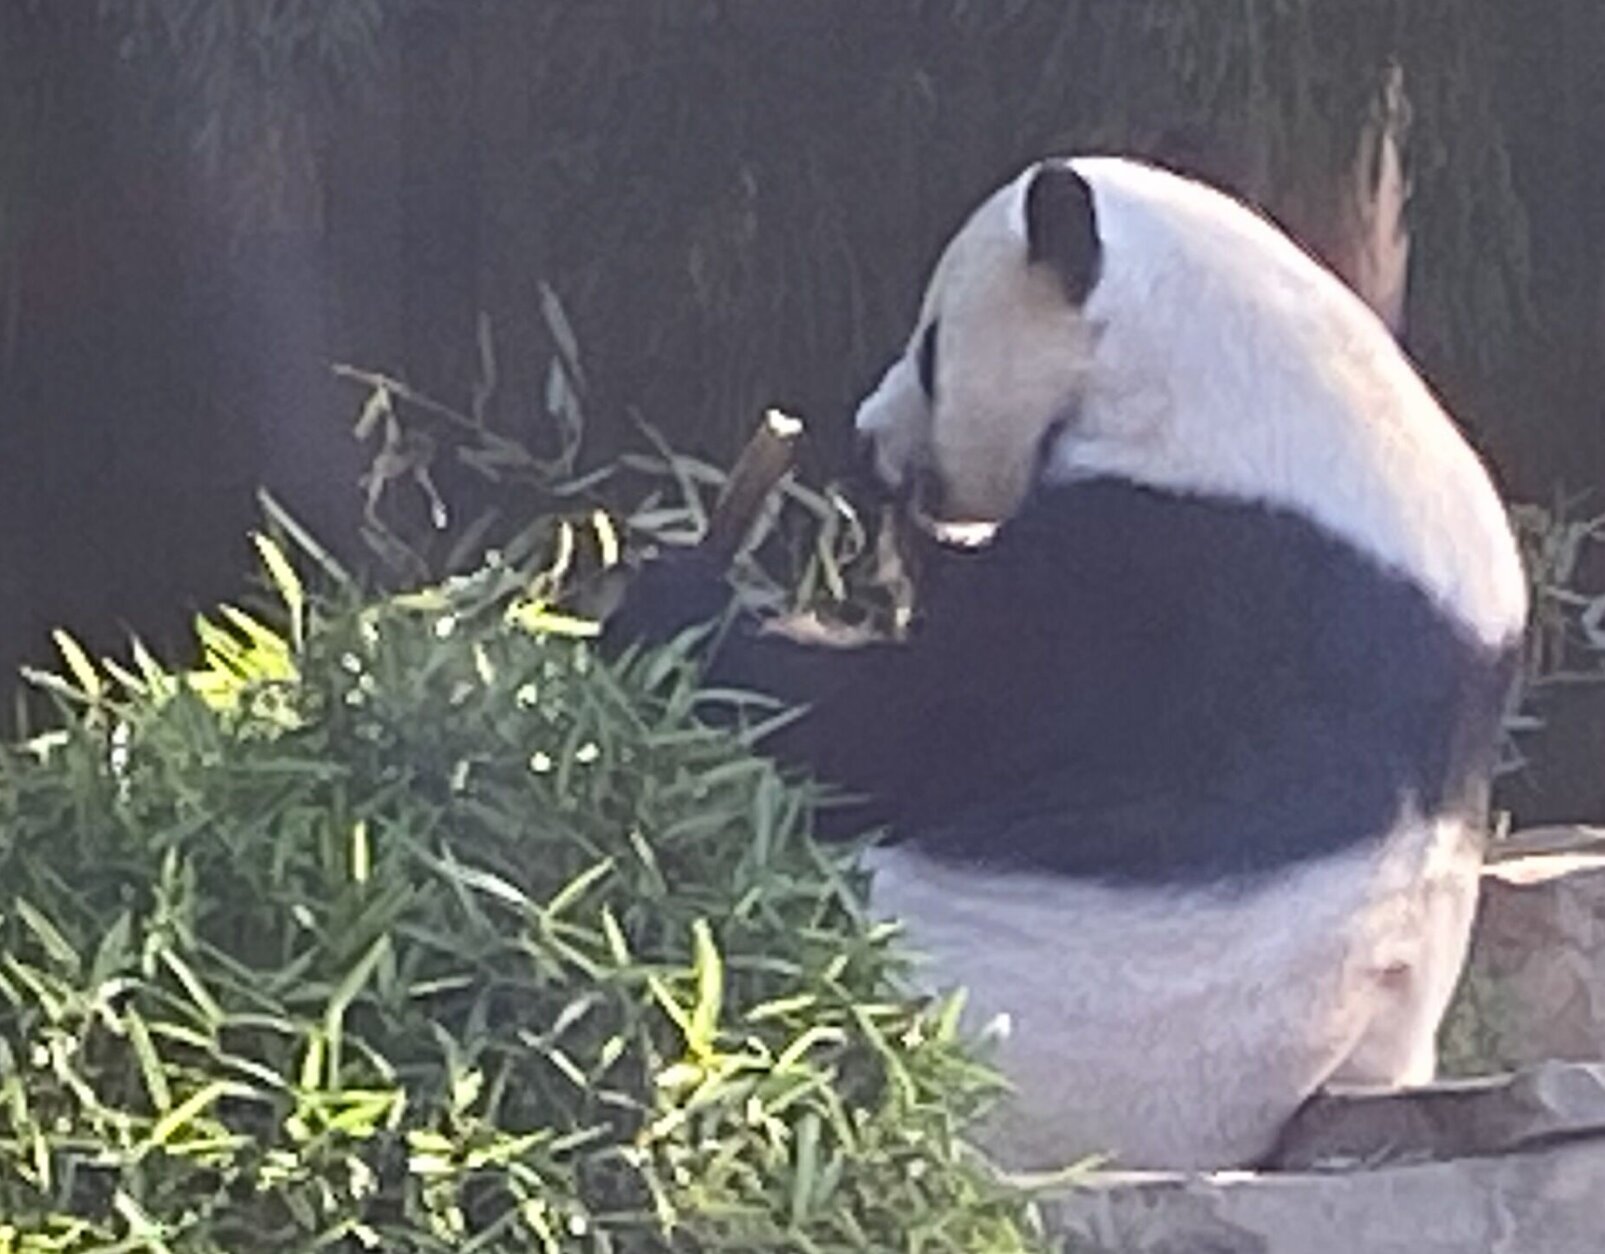 <p>Only about 20 people will be allowed inside the panda house at any given time, zoo officials said. Groups will be staggered in 15-minute increments.</p>
<p>One last-minute rule change involves masks: they are no longer required outdoors for people who have been fully vaccinated.</p>
